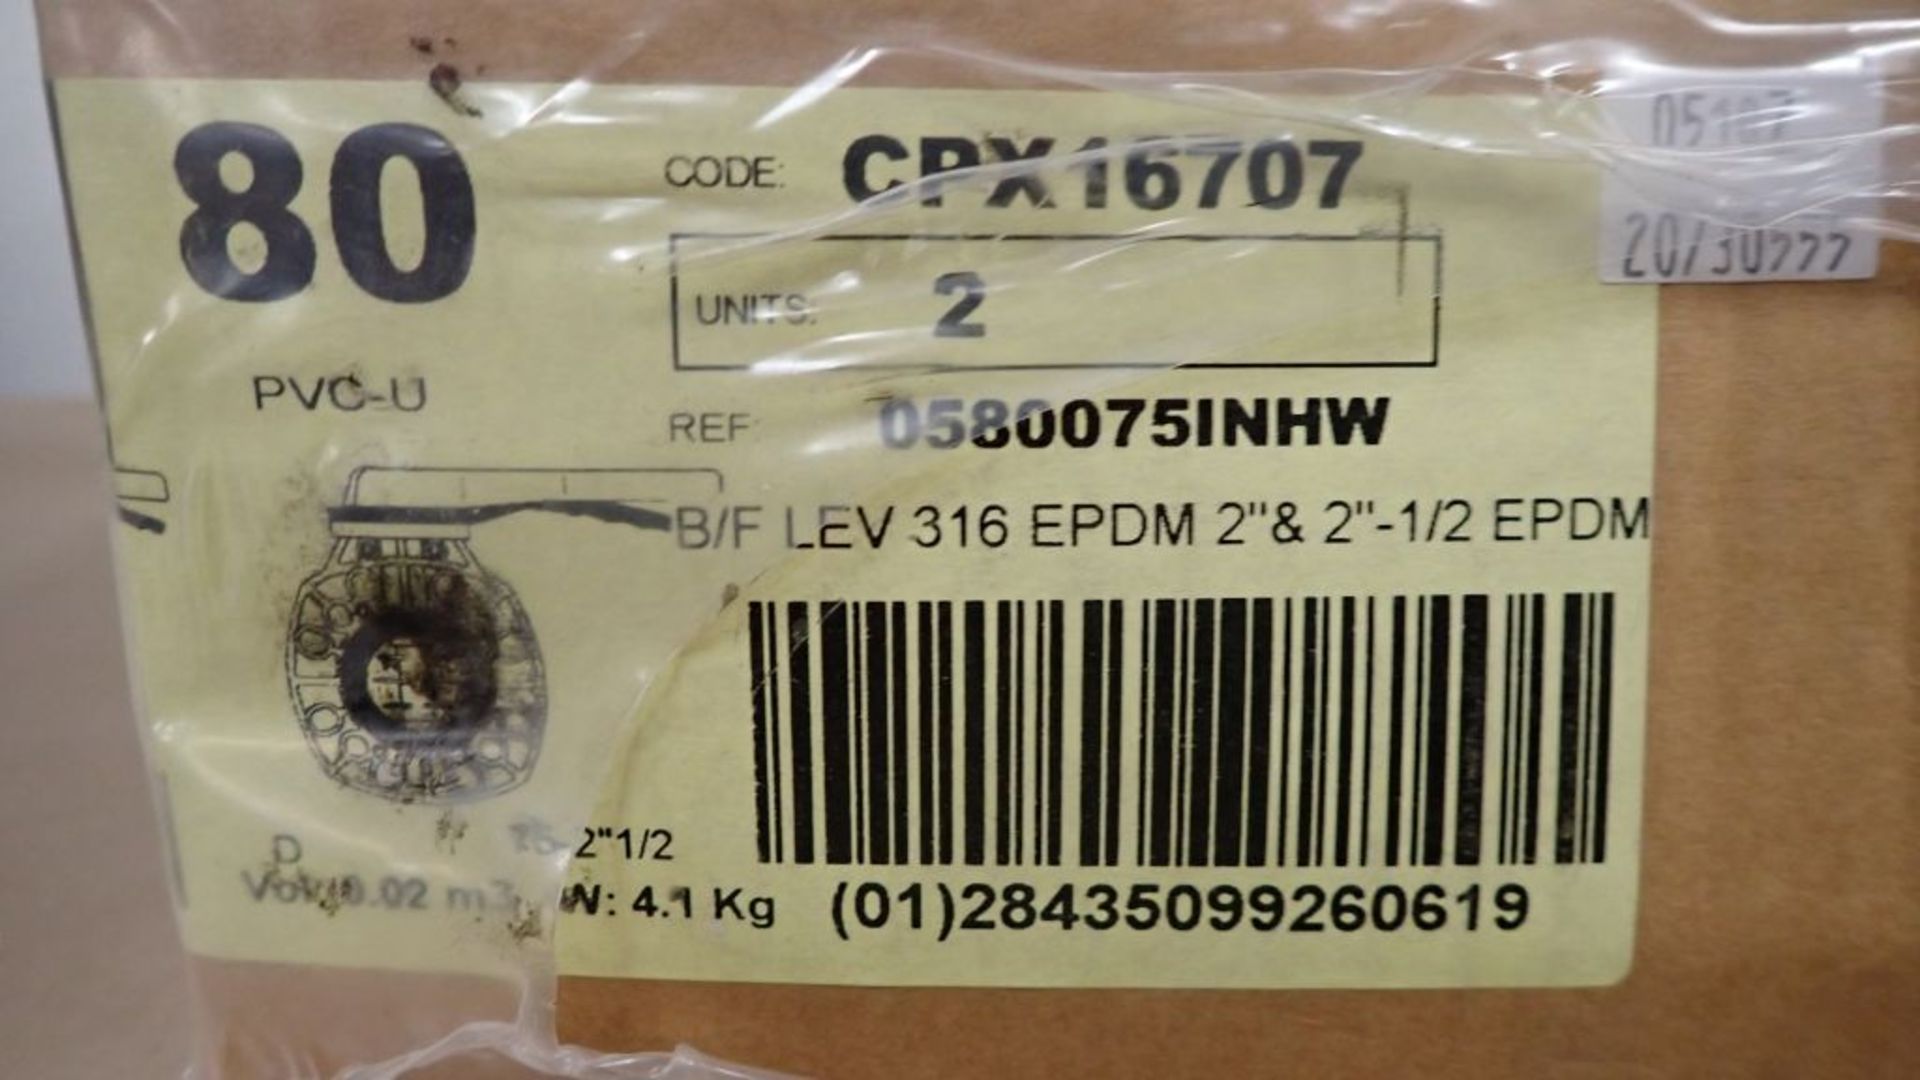 Lot of (8) Cepex Butterfly Valves | Part No. CPX16707; Size: 2-1/2"; Tag: 232702 - Image 12 of 12